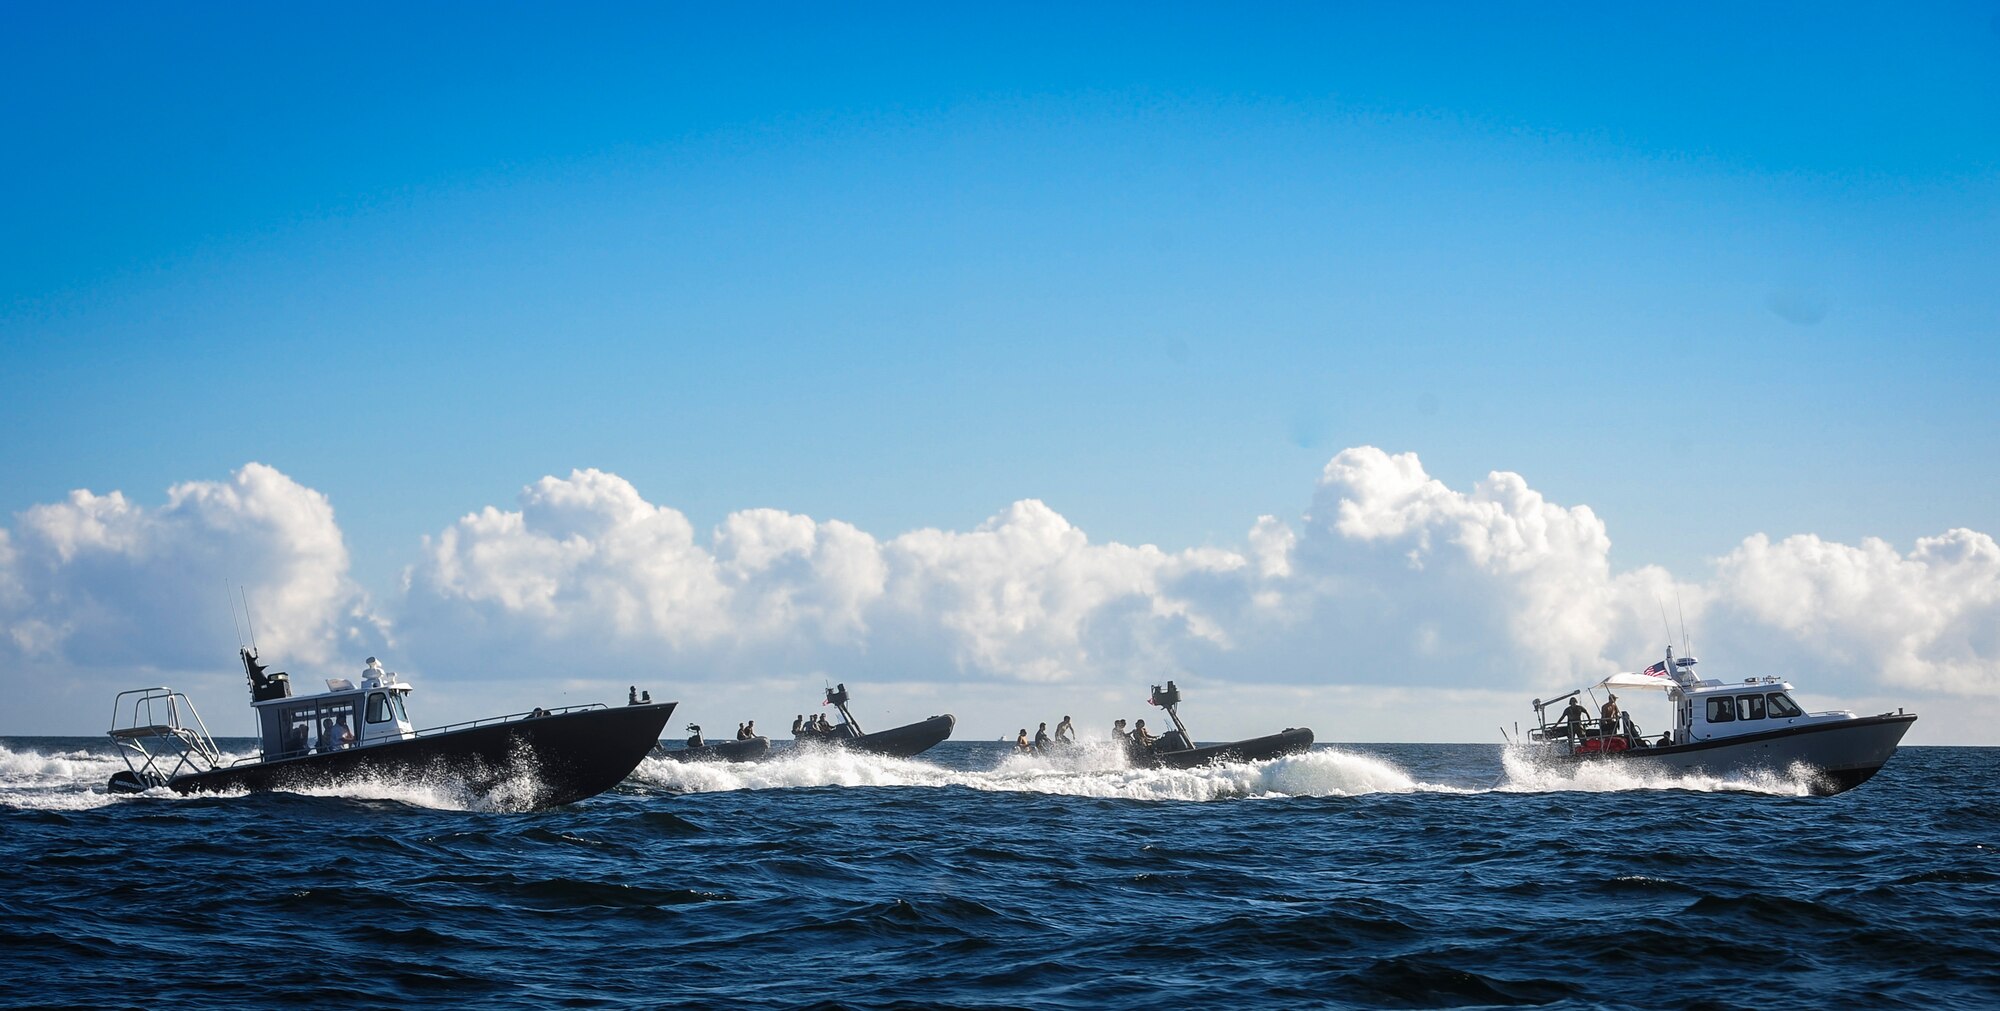 Special operation forces and maritime operation members travel to the Gulf of Mexico to retrieve a rigid inflatable boat during Maritime Craft Aerial Delivery Systems (MCADS) training, Nov. 12, 2015. MCADS enable special operation forces members to rapidly deploy anywhere around the world in a maritime environment. (U.S. Air Force photo by Senior Airman Meagan Schutter)